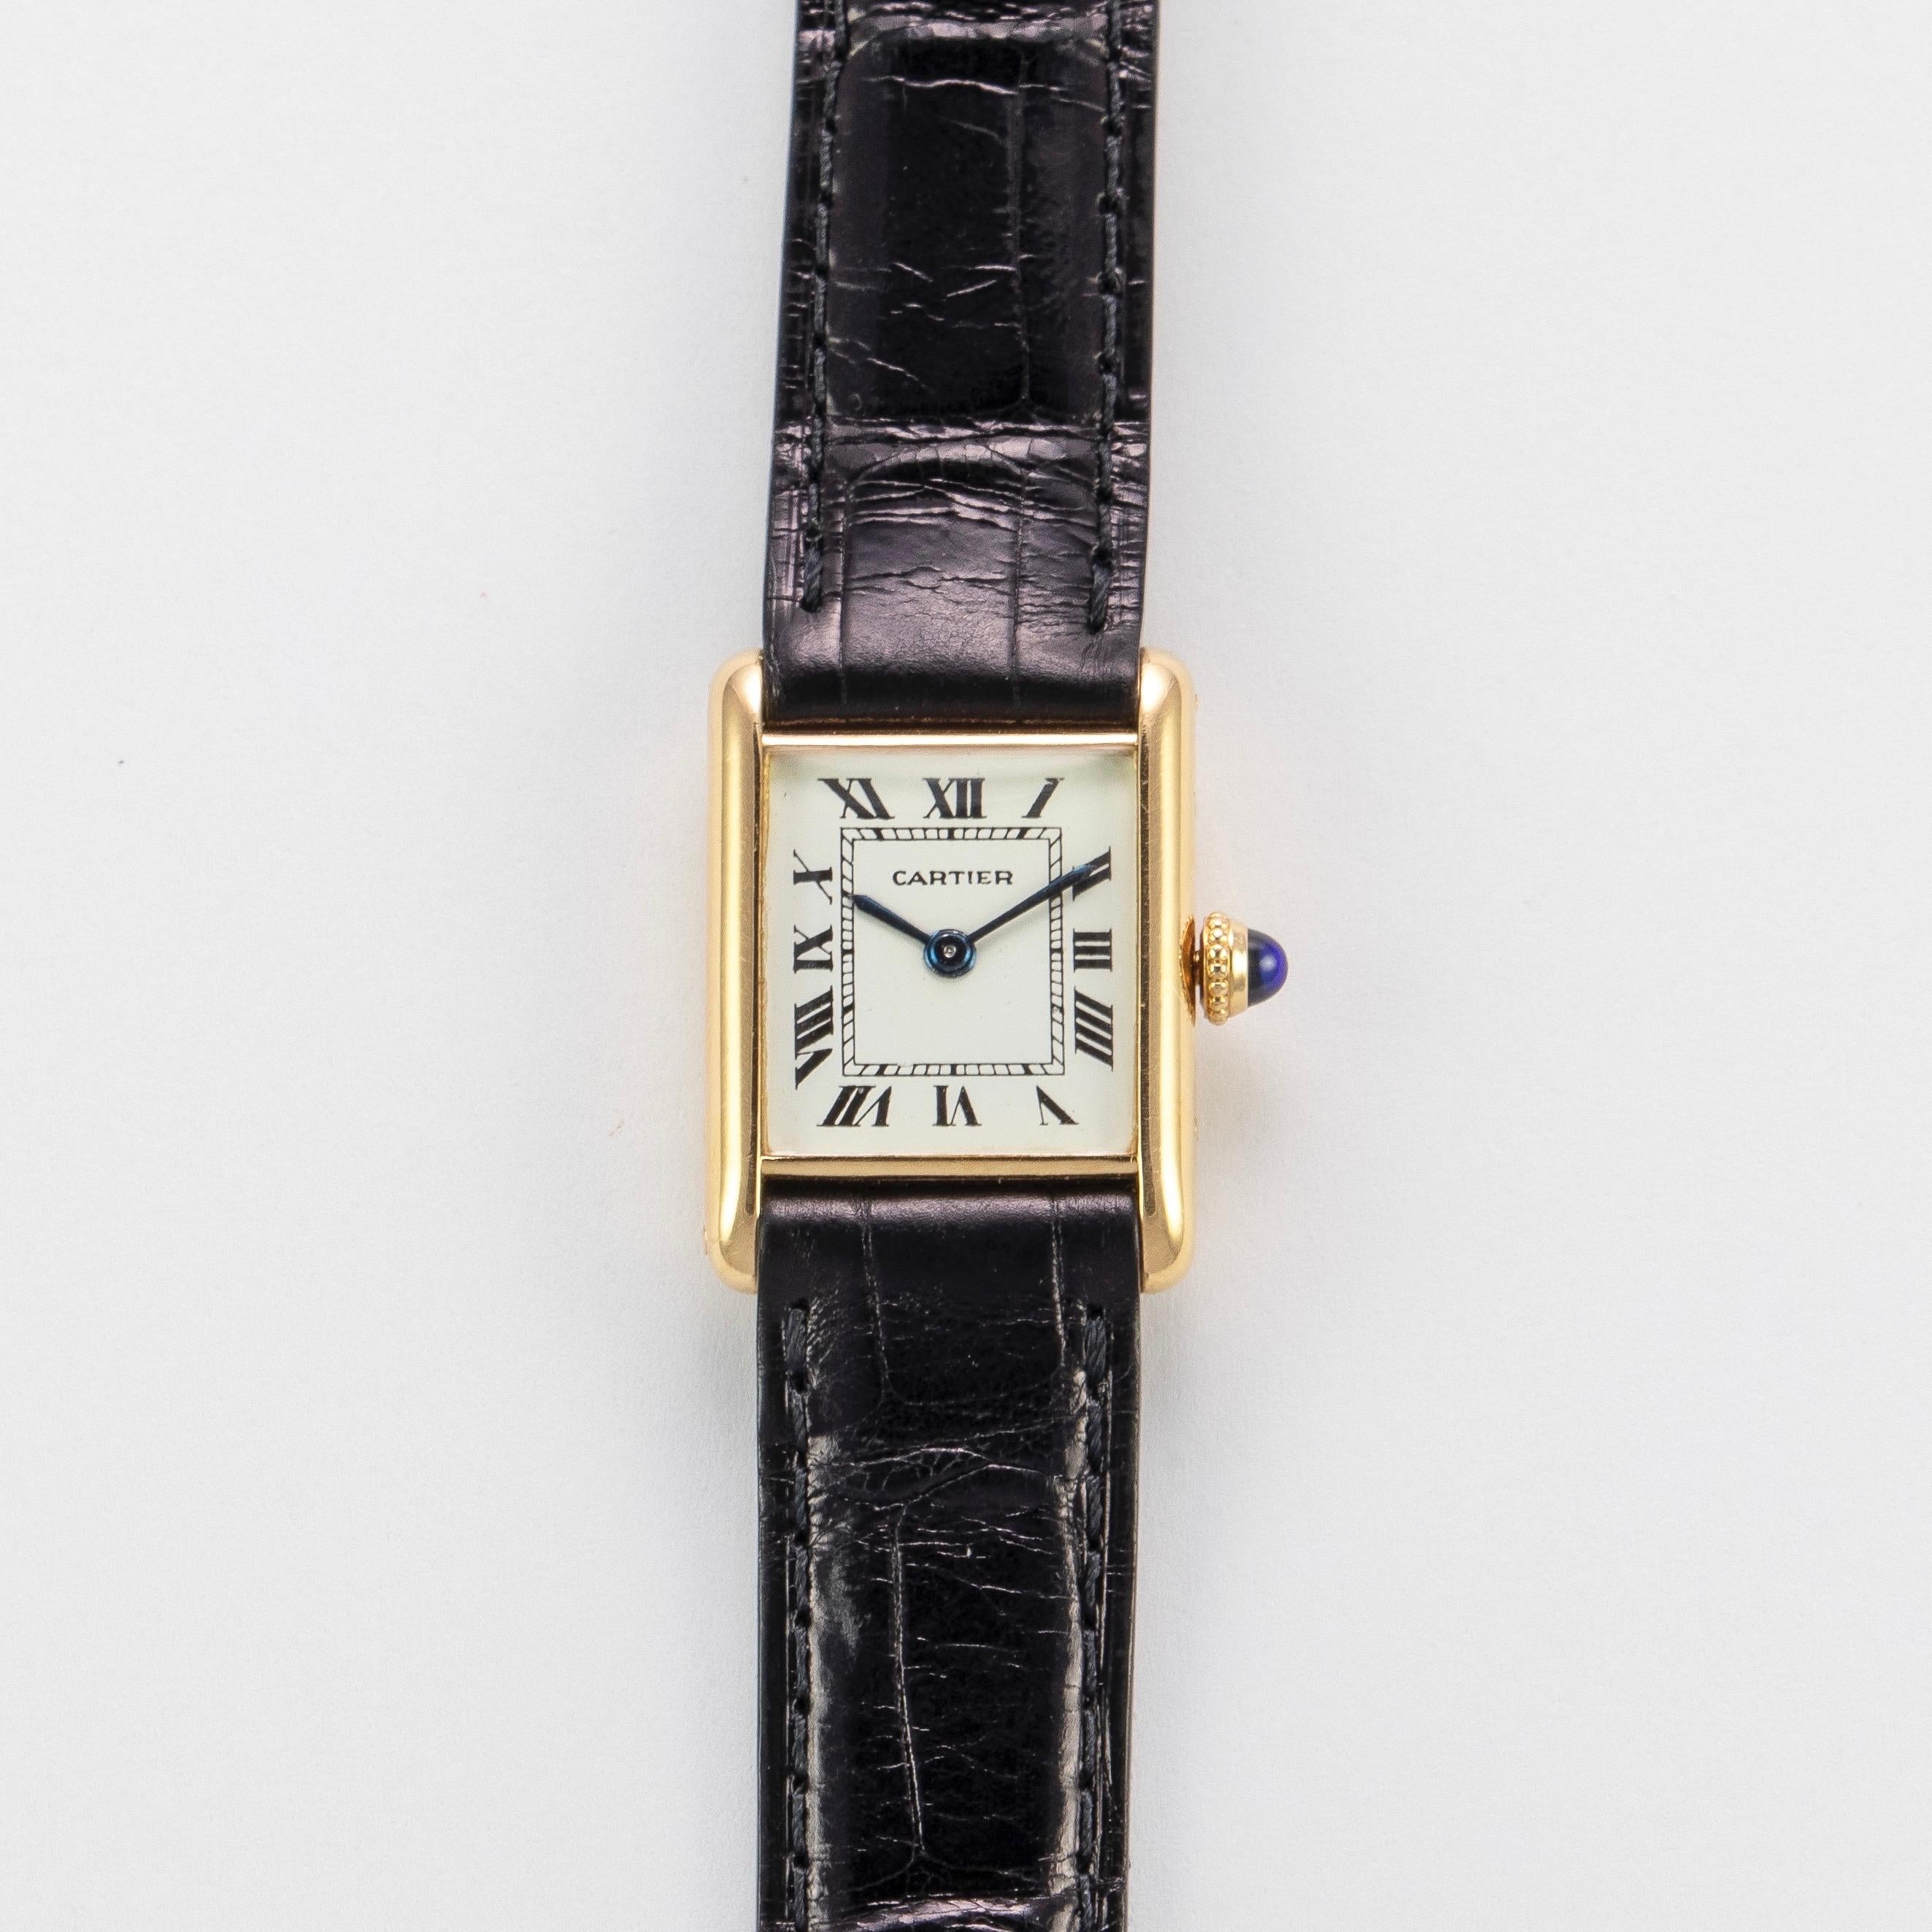 Classic. Timeless. Always.

Cartier 18K Yellow Gold Ladies Tank Manual Wind Watch

The Cartier Tank is an icon. It is timeless. It has graced the wrists of celebrities, dignitaries, and world leaders and has marked important milestones. In 1917, the